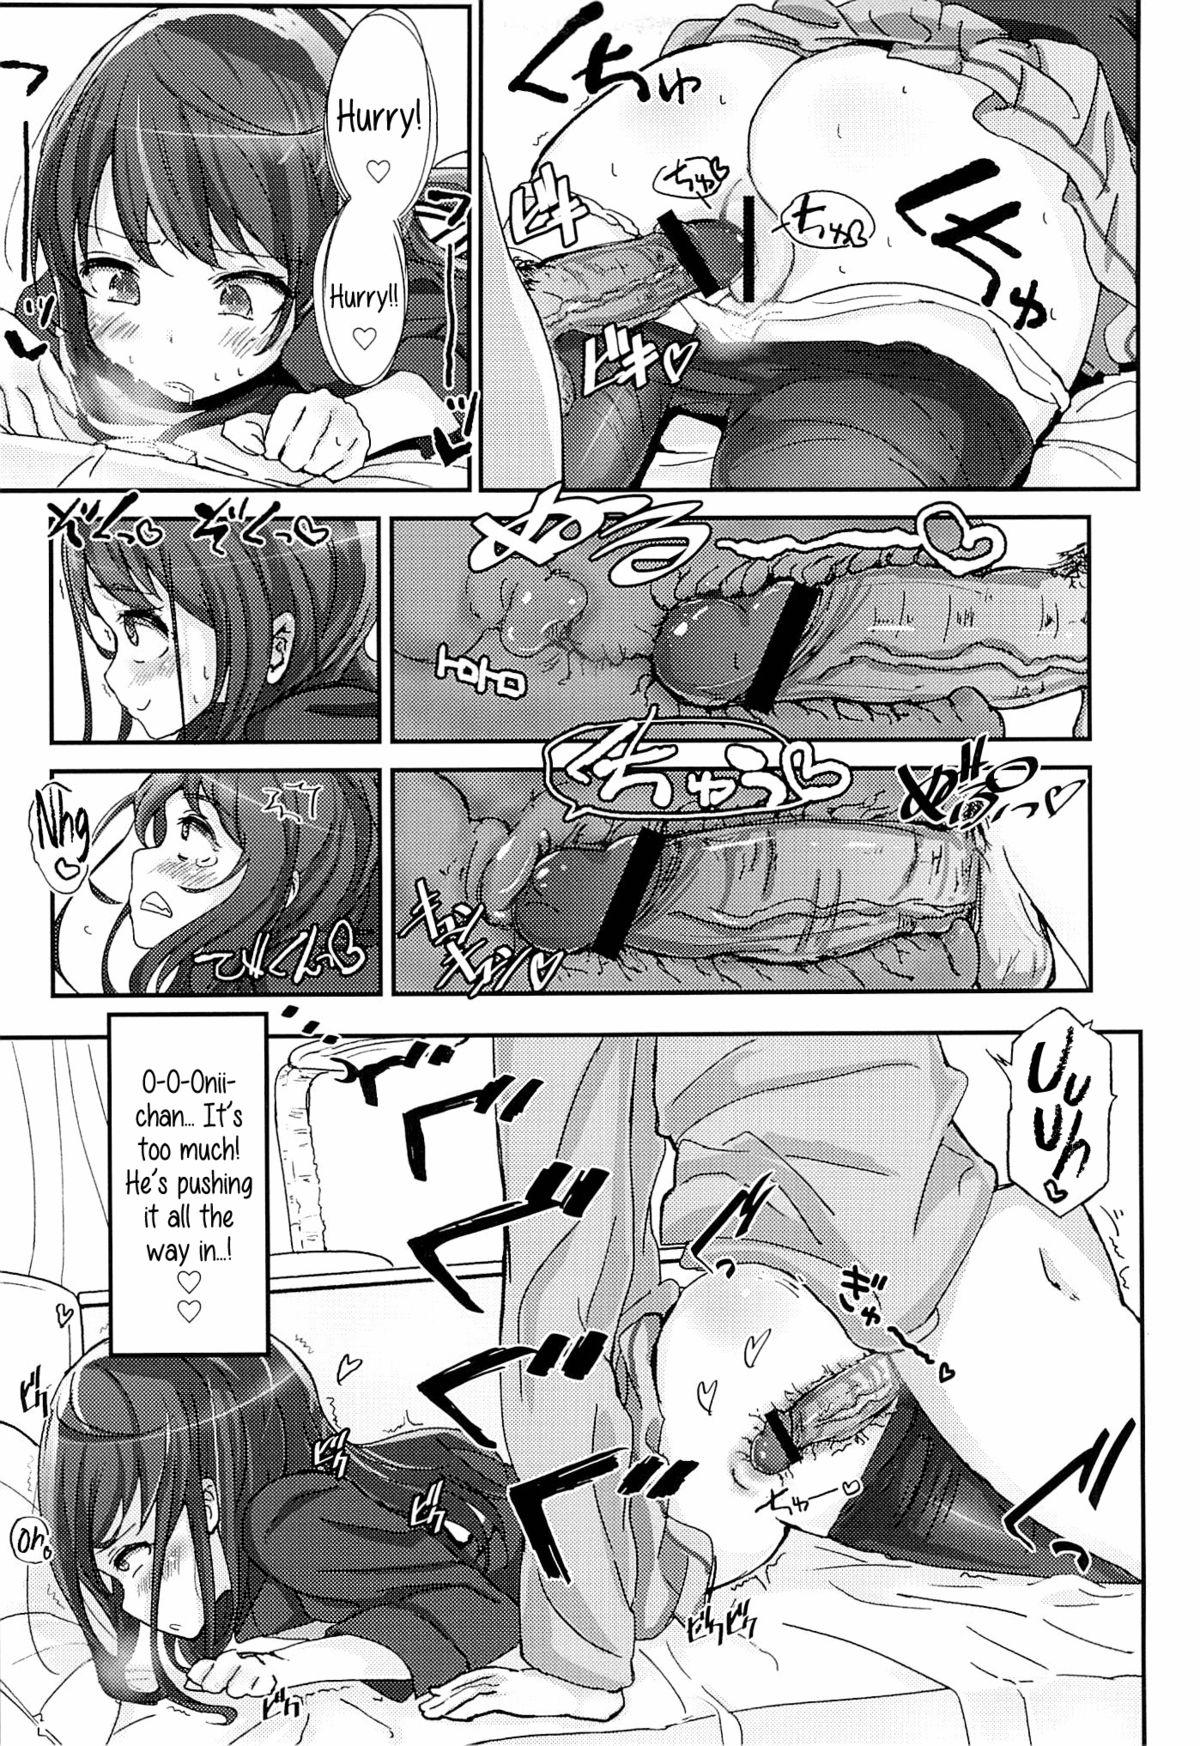 Cum On Pussy Shikyuukou no Kanata, Onii chan no Hate | Beyond the mouth of the uterus lies Onii-chan’s demise Hot - Page 6